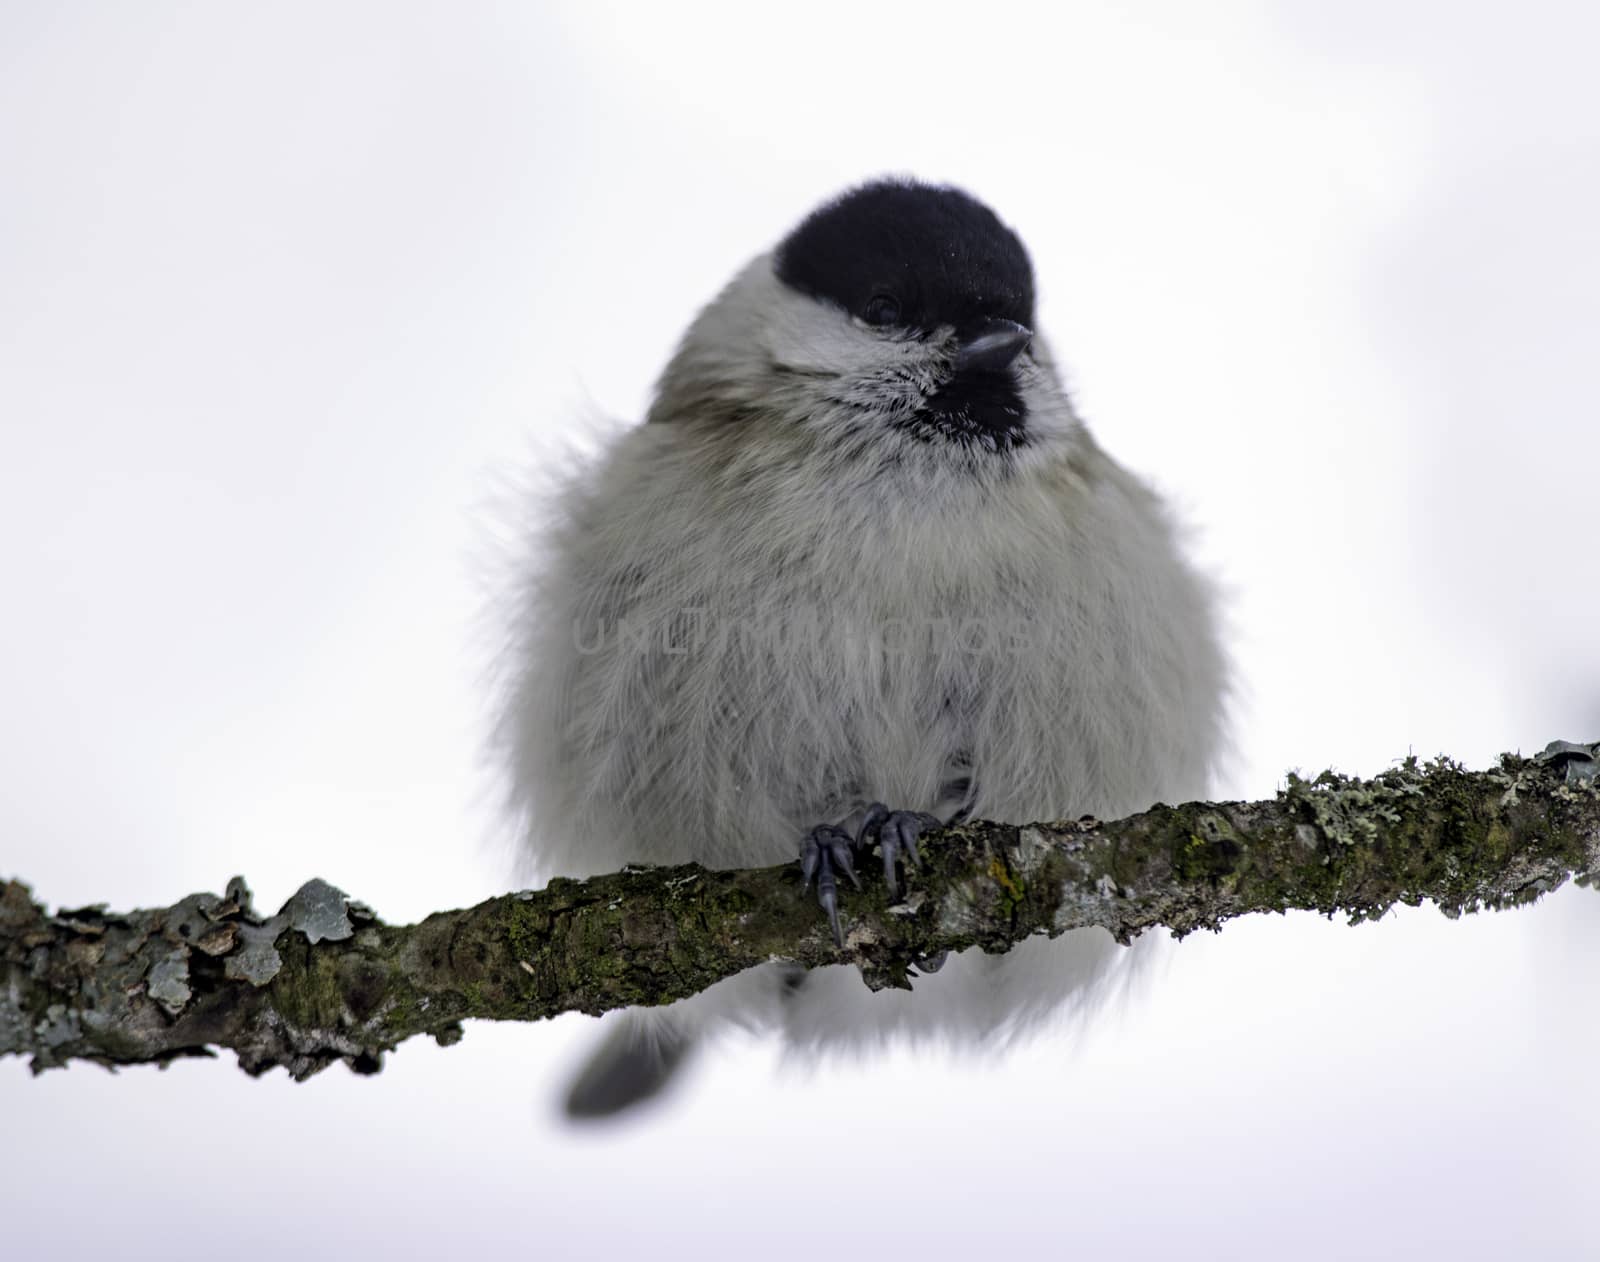 Willow tit by thomas_males